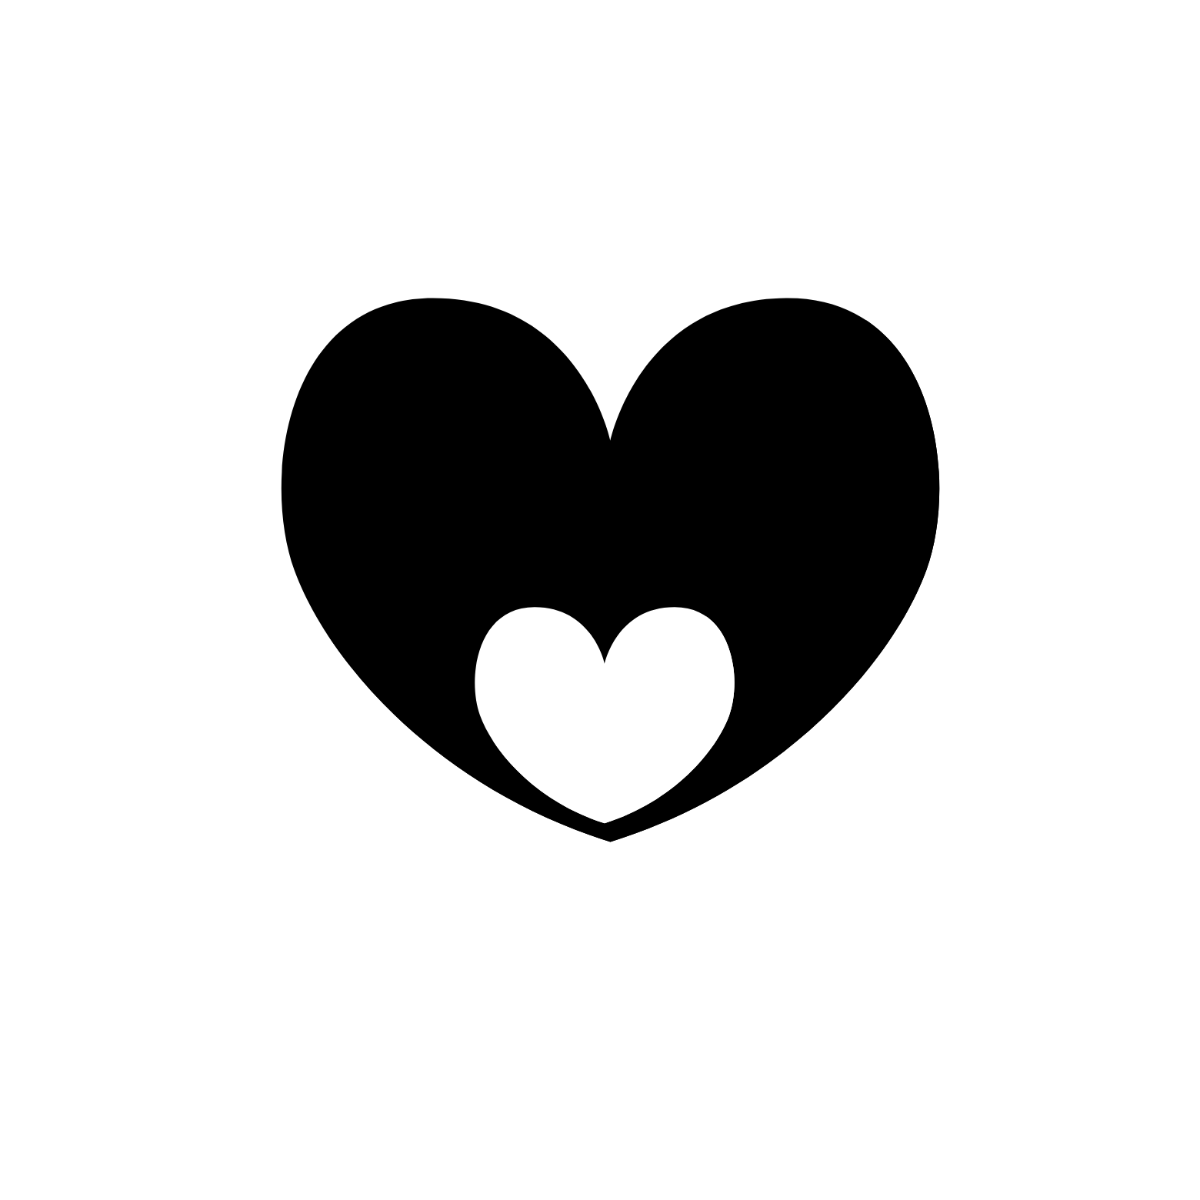 Black and White Heart Silhouette Template